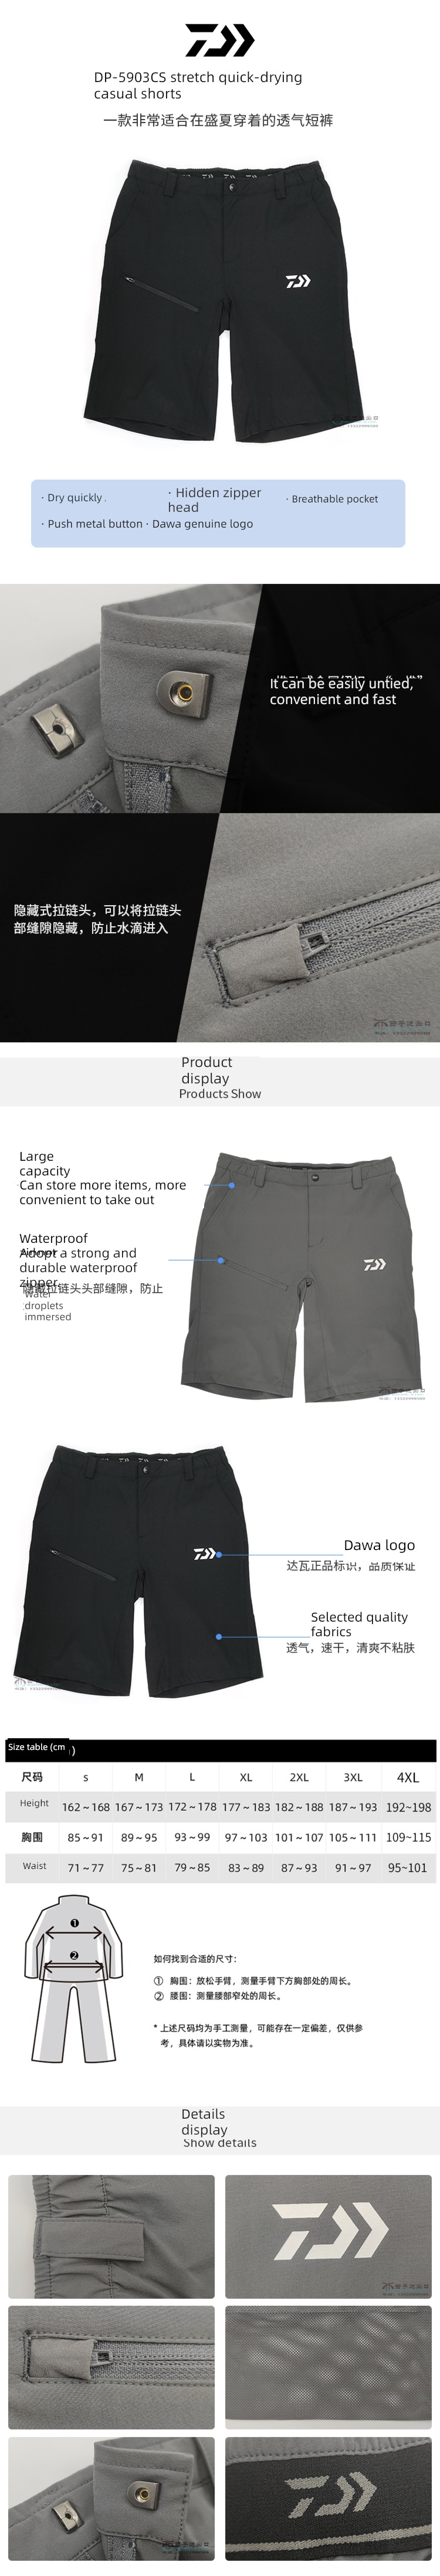 elastic force quick-drying breathable Leisure and comfort motion shorts